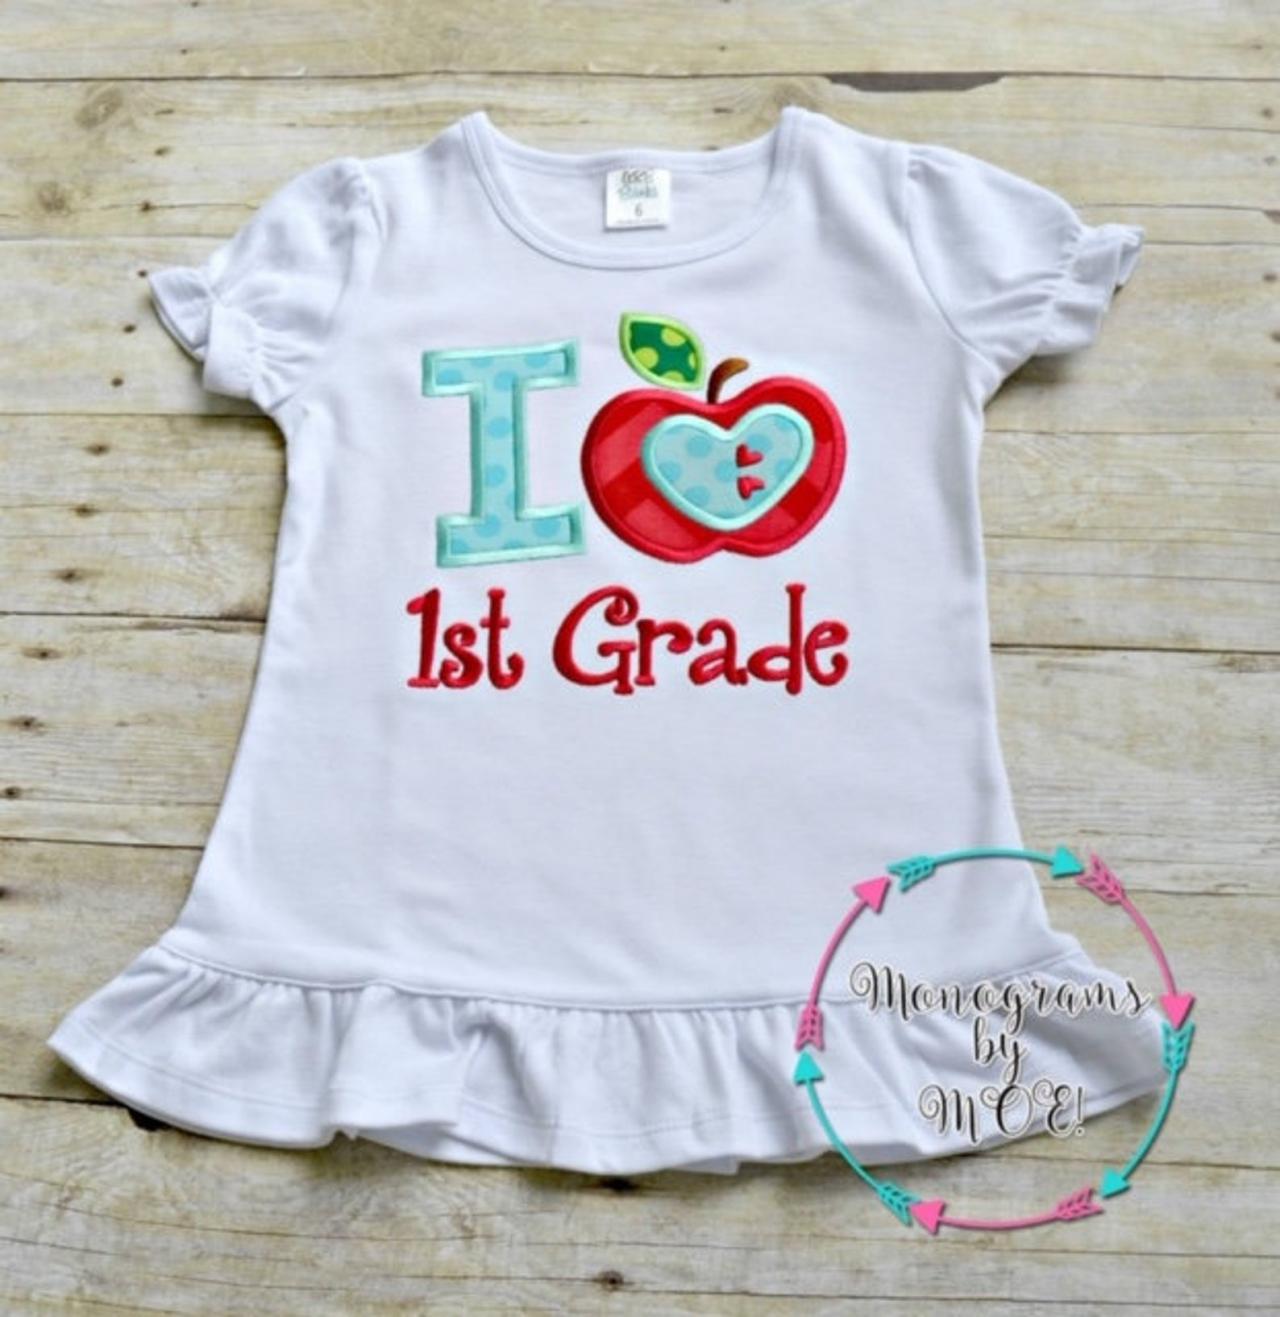 I Love First Grade Shirt / Embroidered School Shirt / Back To School Shirt / Custom Embroidered Shirt / First Grade Shirt / School Shirt